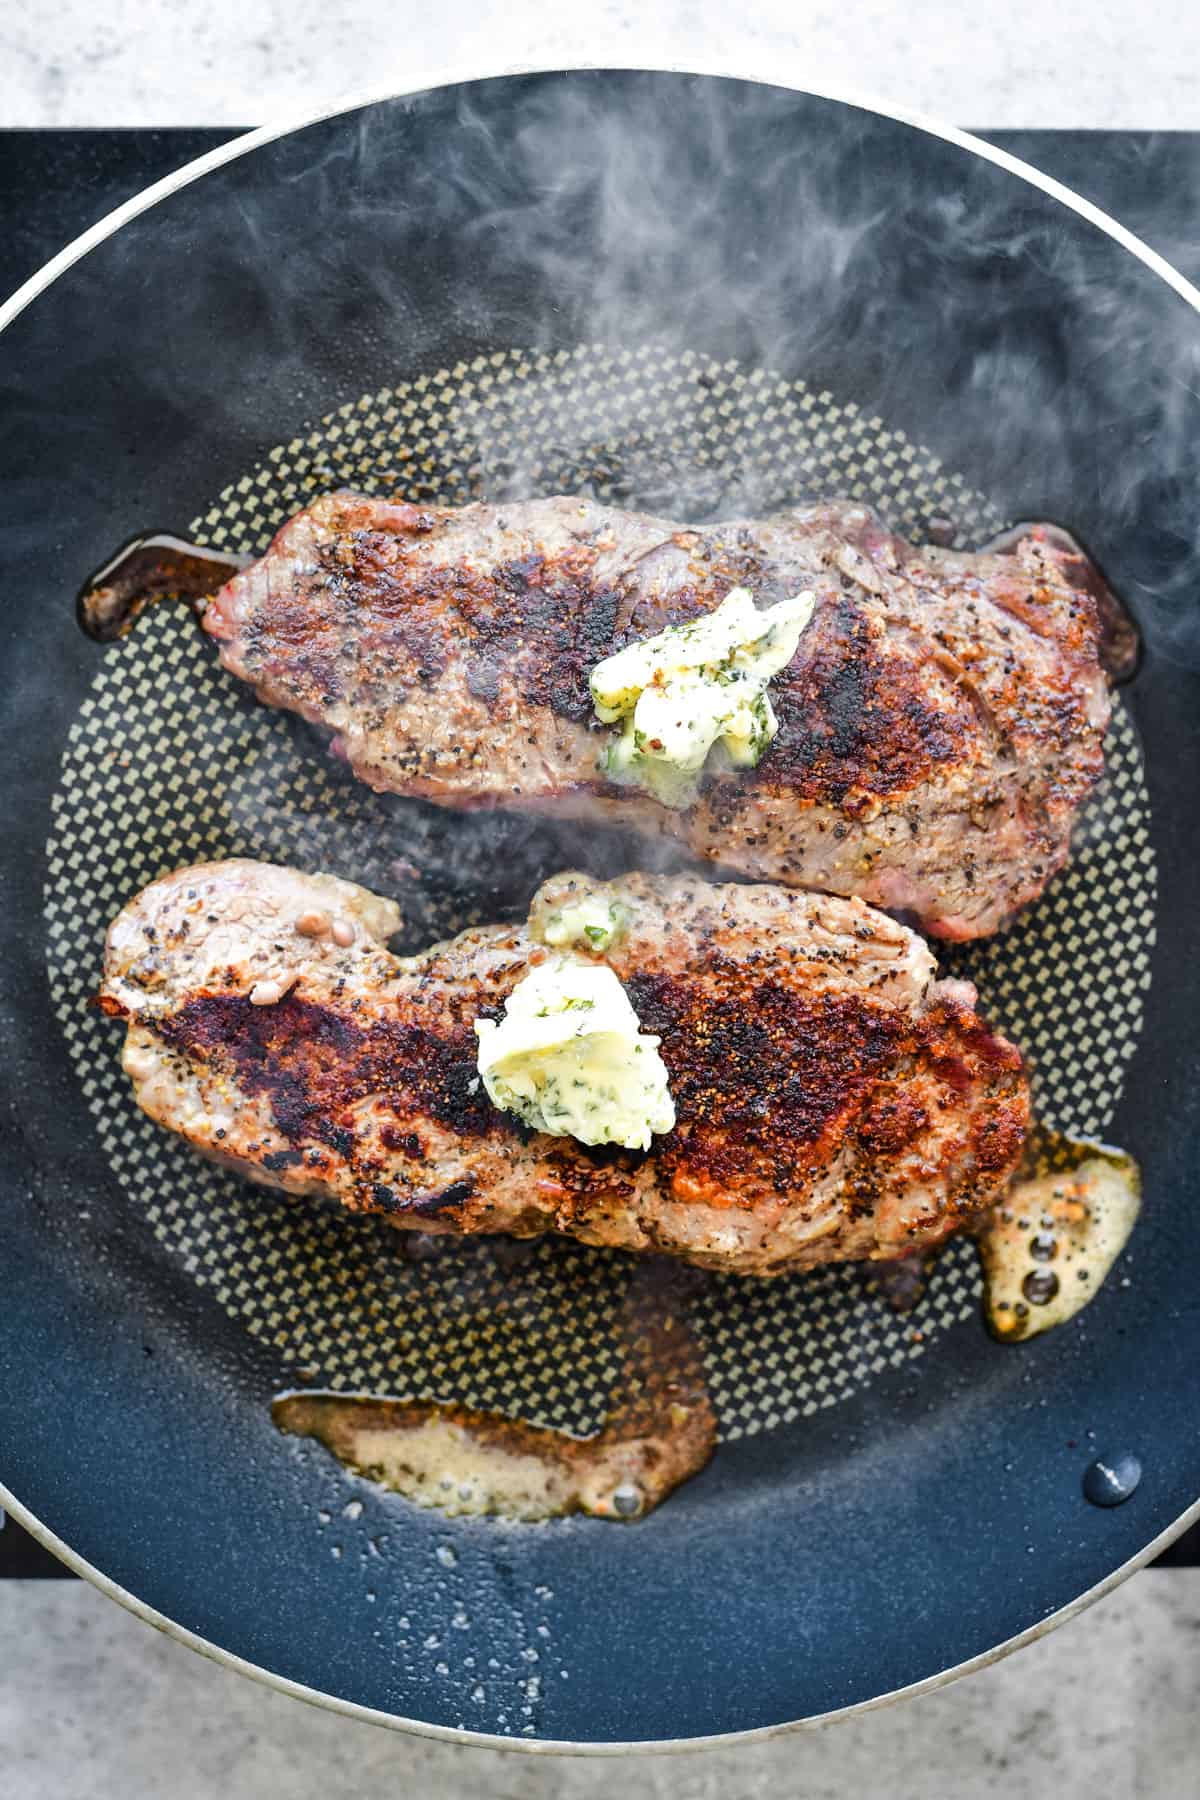 https://www.thegunnysack.com/wp-content/uploads/2019/03/How-To-Cook-Steaks-On-A-Stovetop.jpg